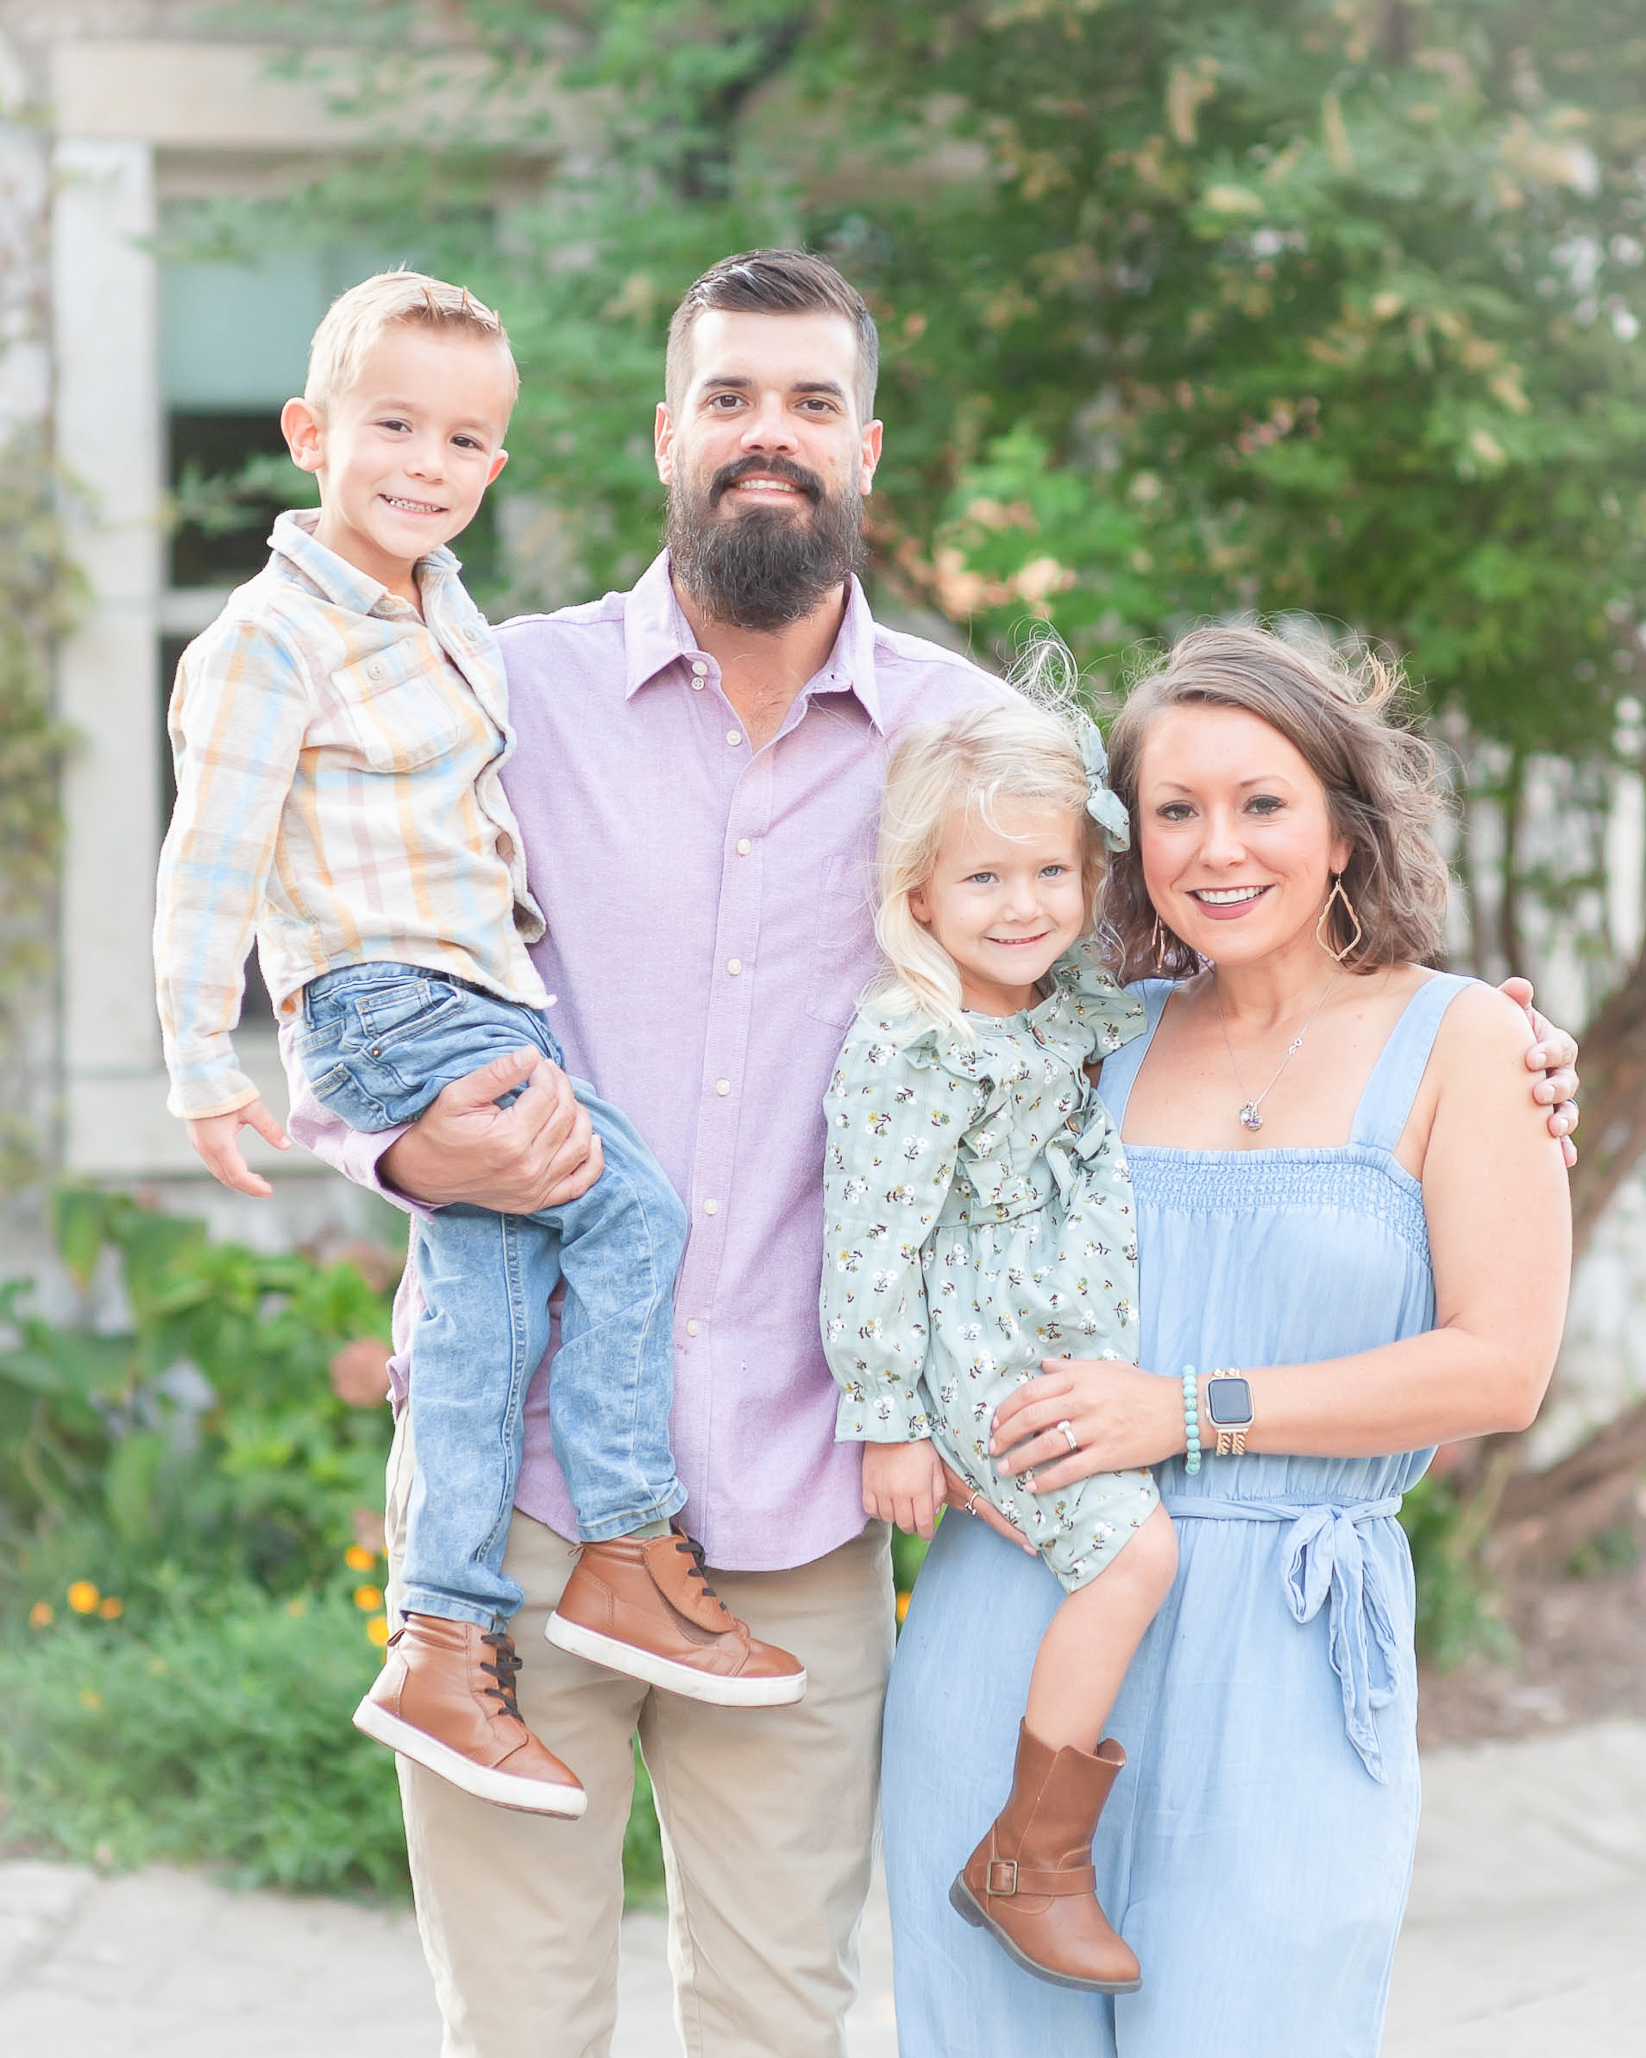 beautiful family in Adriatica Village McKinney Texas captured by Allison Amores Photography